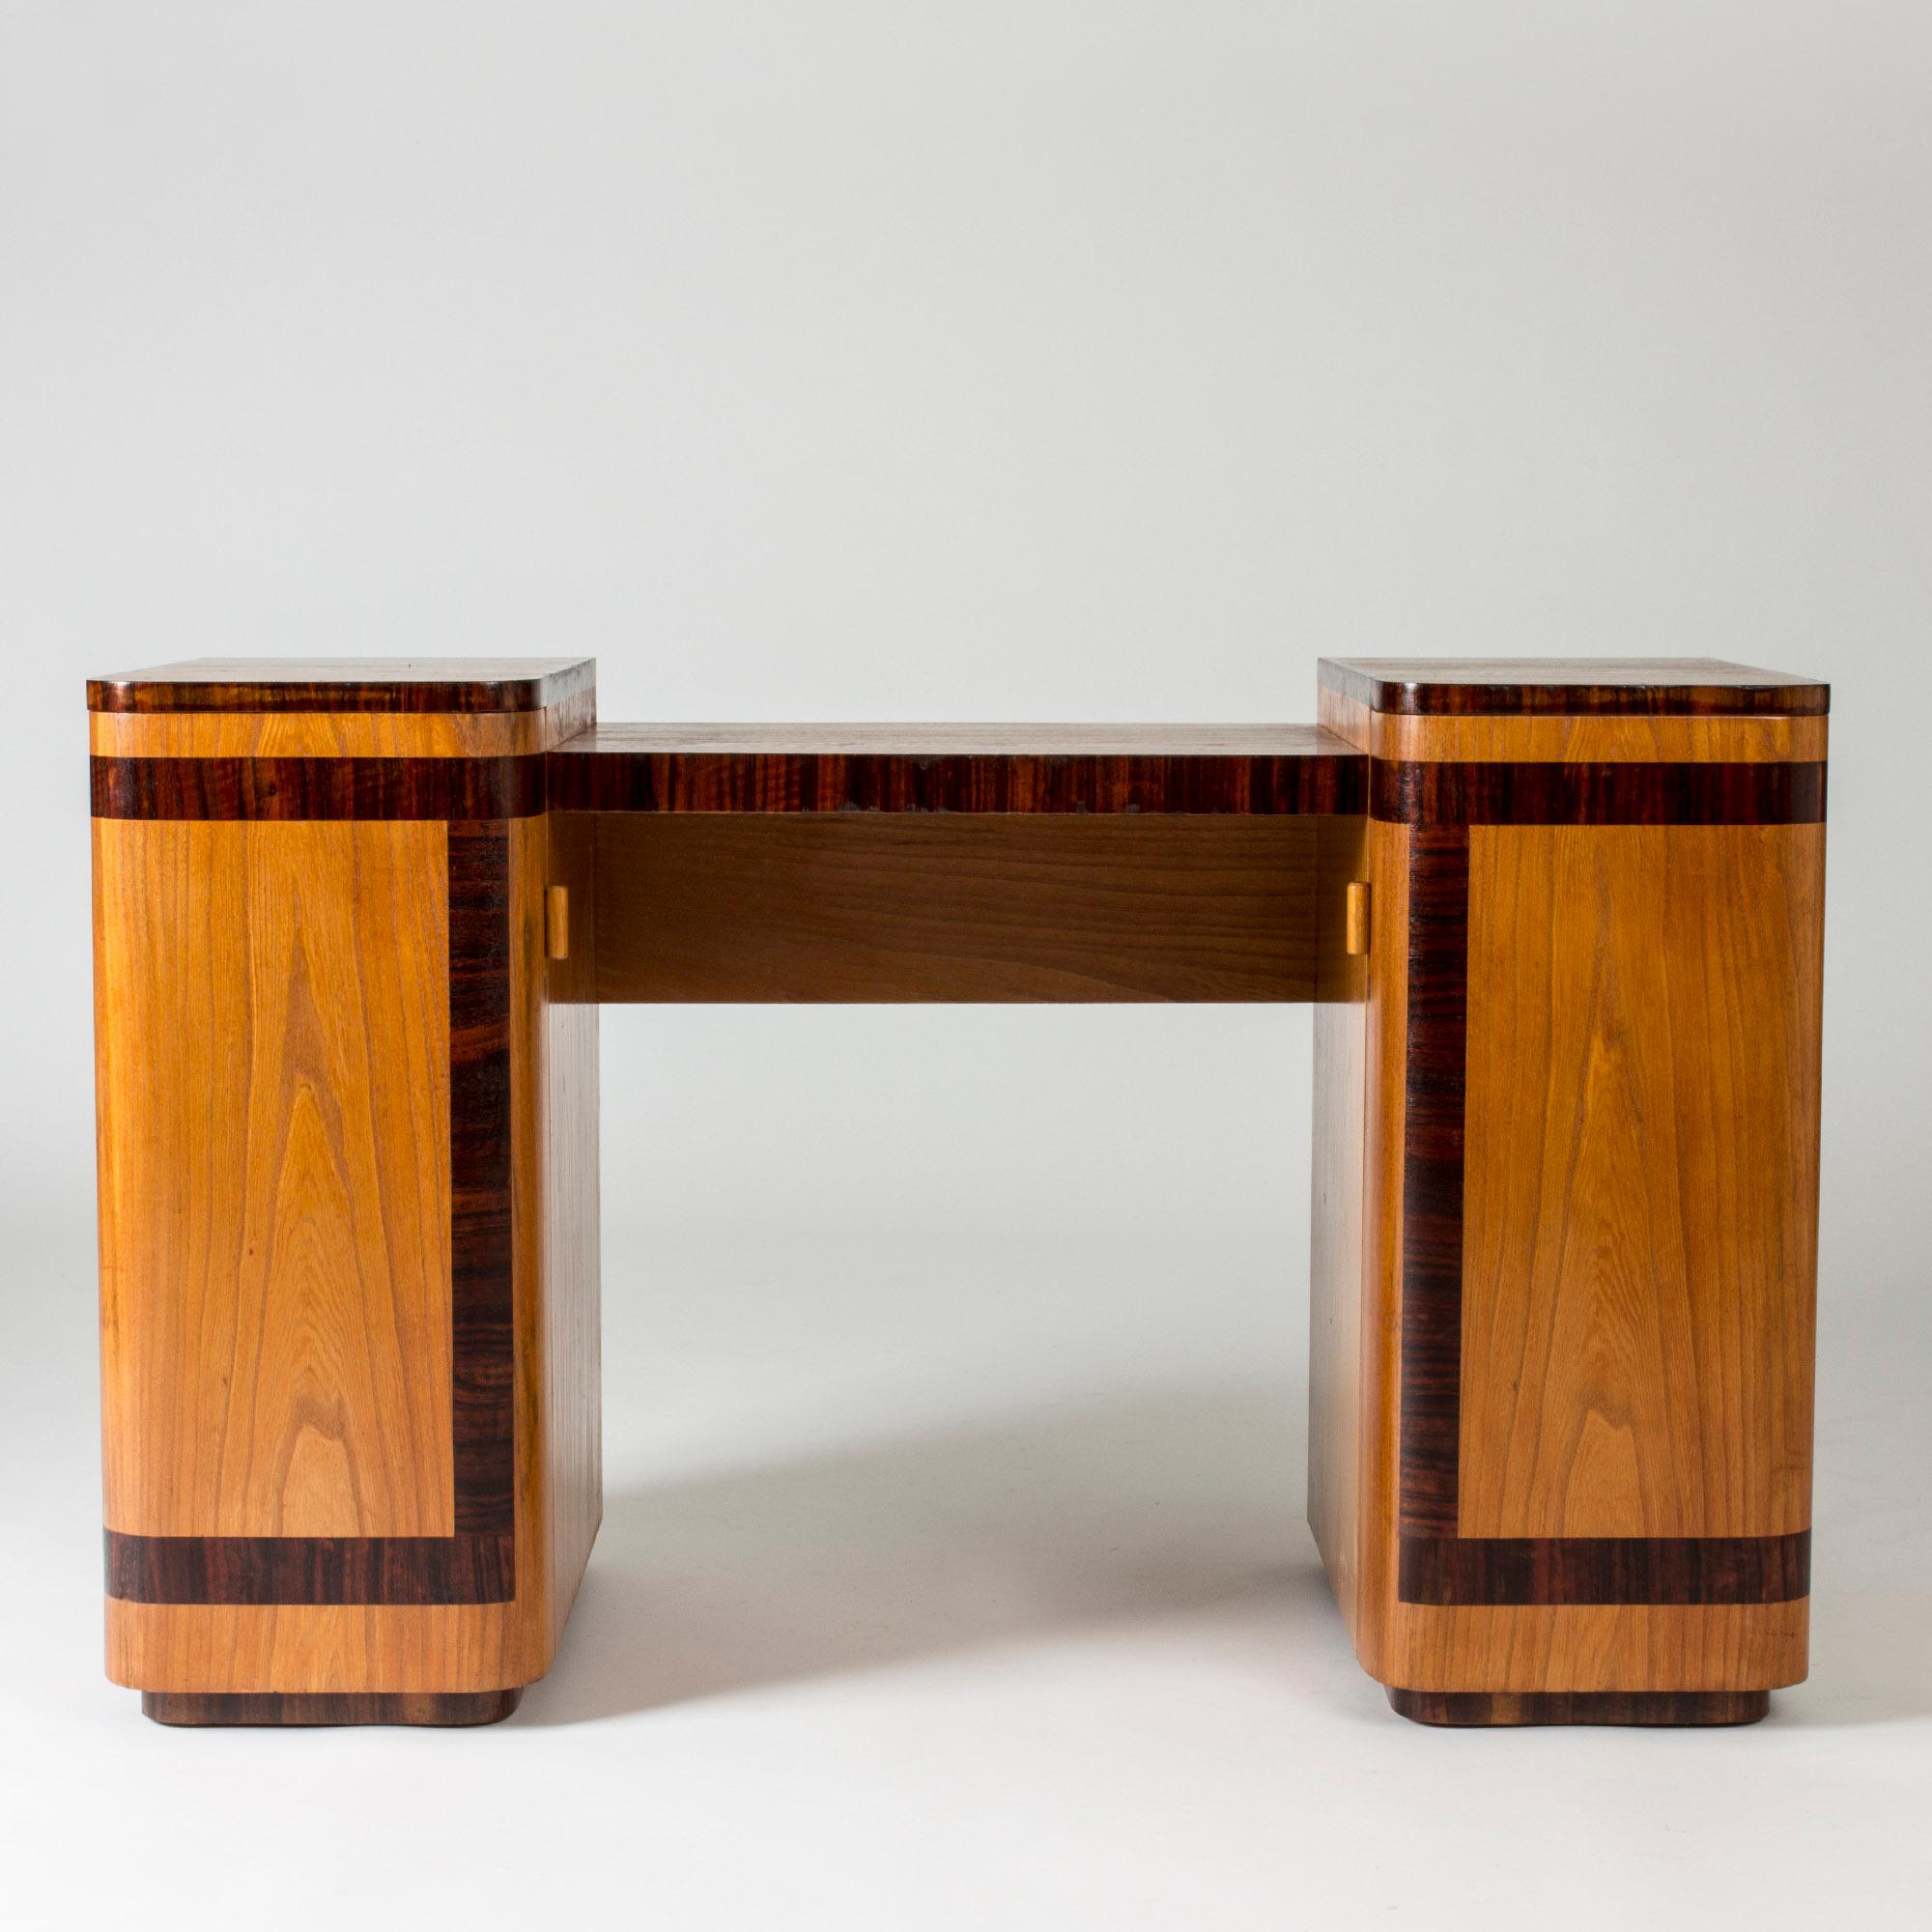 Amazing functionalist dressing table by Axel Einar Hjorth. Made from elm with contrasting inlaid darker wood. The rounded forms of the sides come together beautifully with the clean, strict decor.